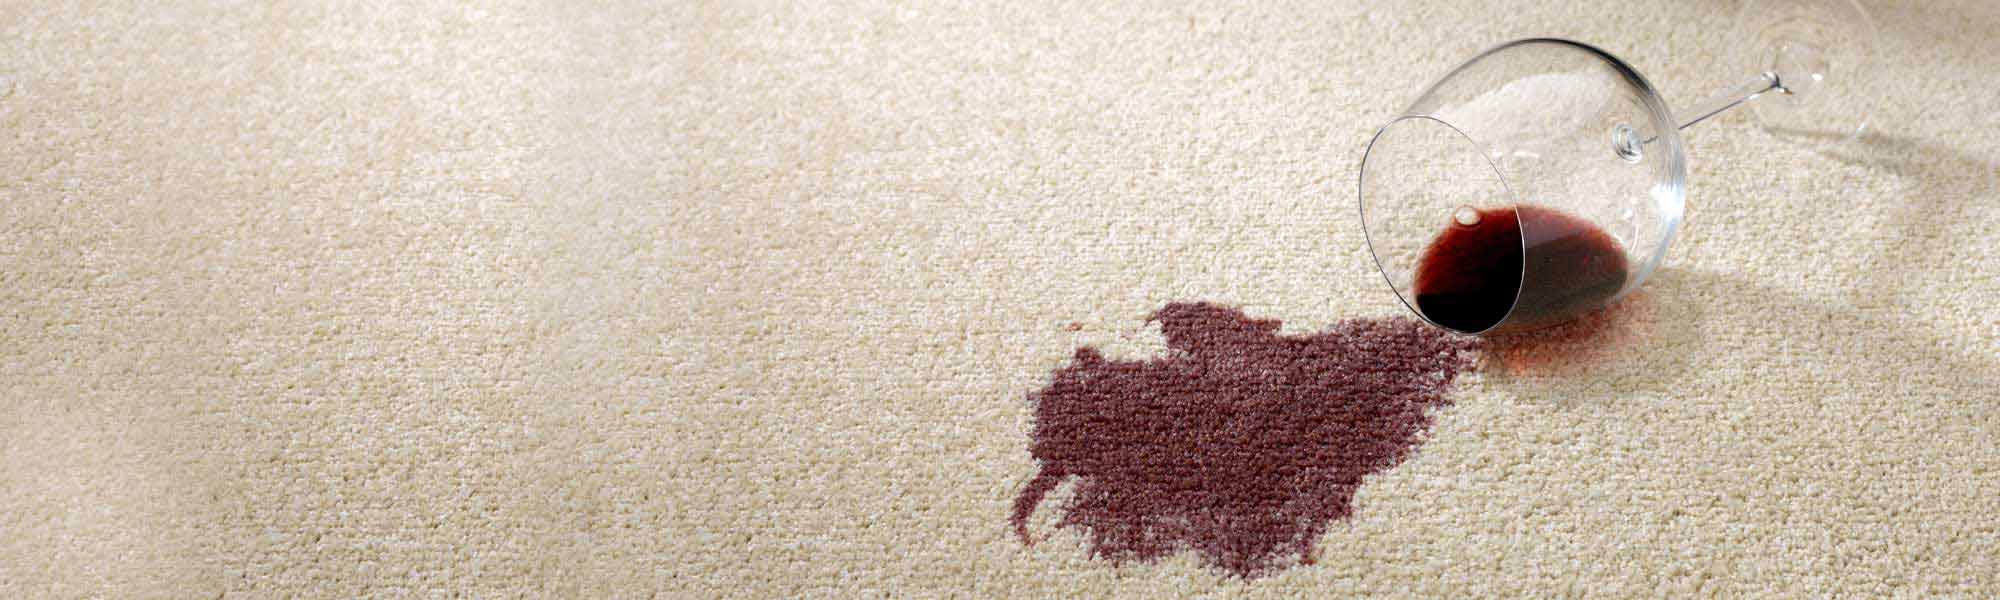 Trust in Chem-Dry of Central Illinois's Stain Removal Service